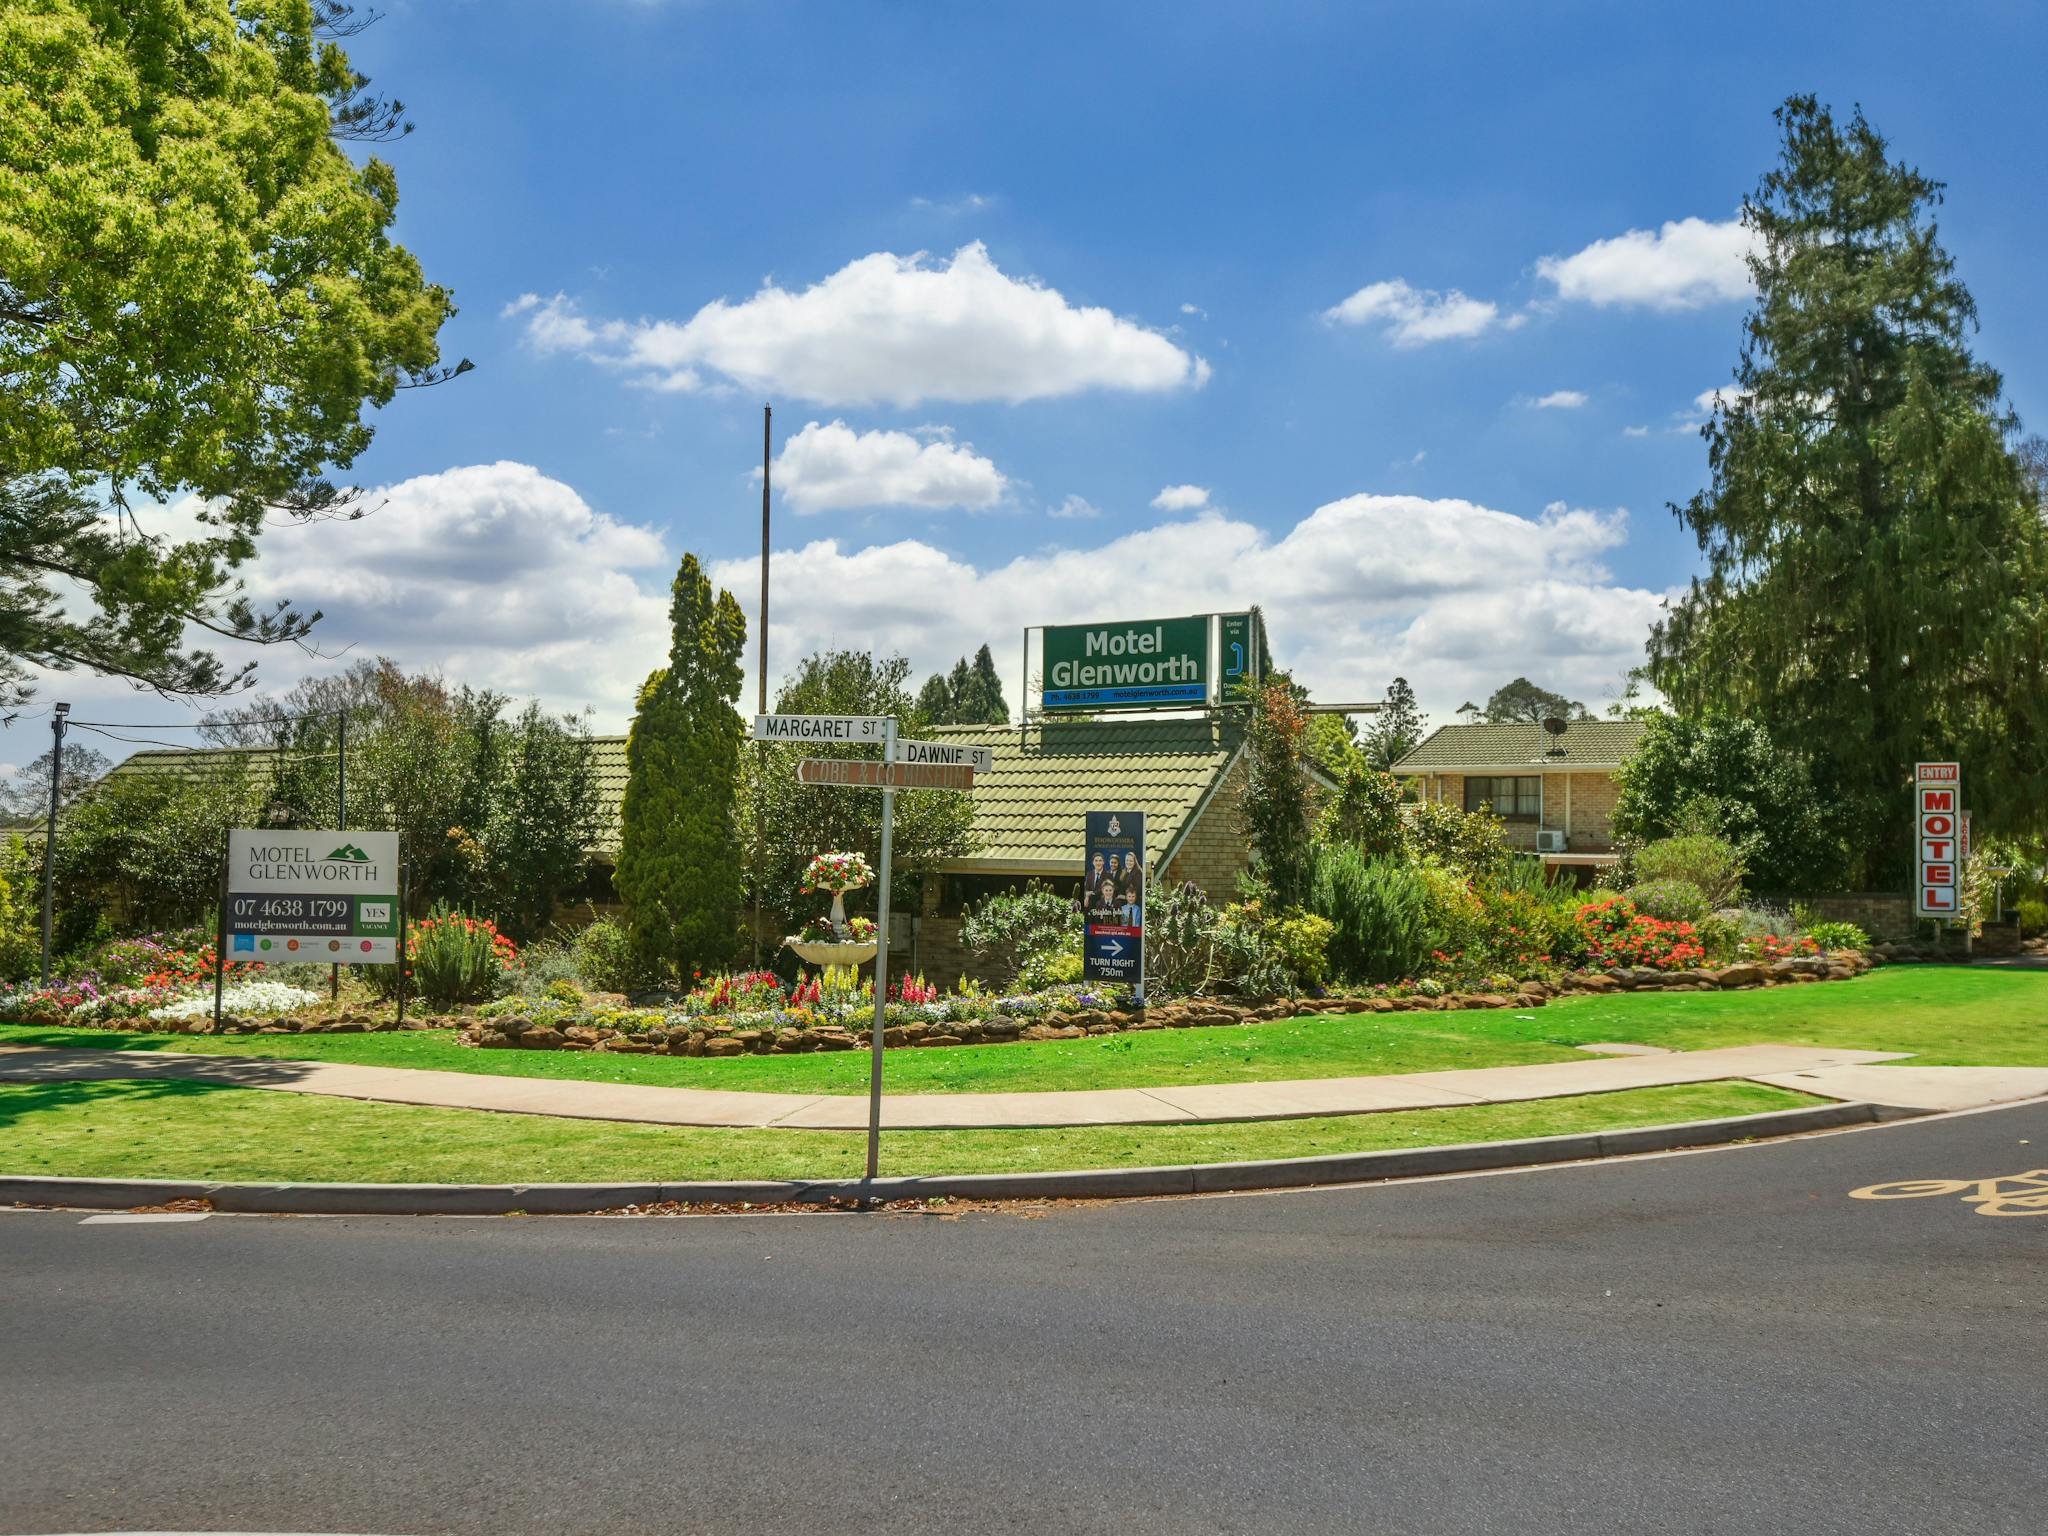 View from street showing location of Motel at cnr Margaret & Dawnie Streets